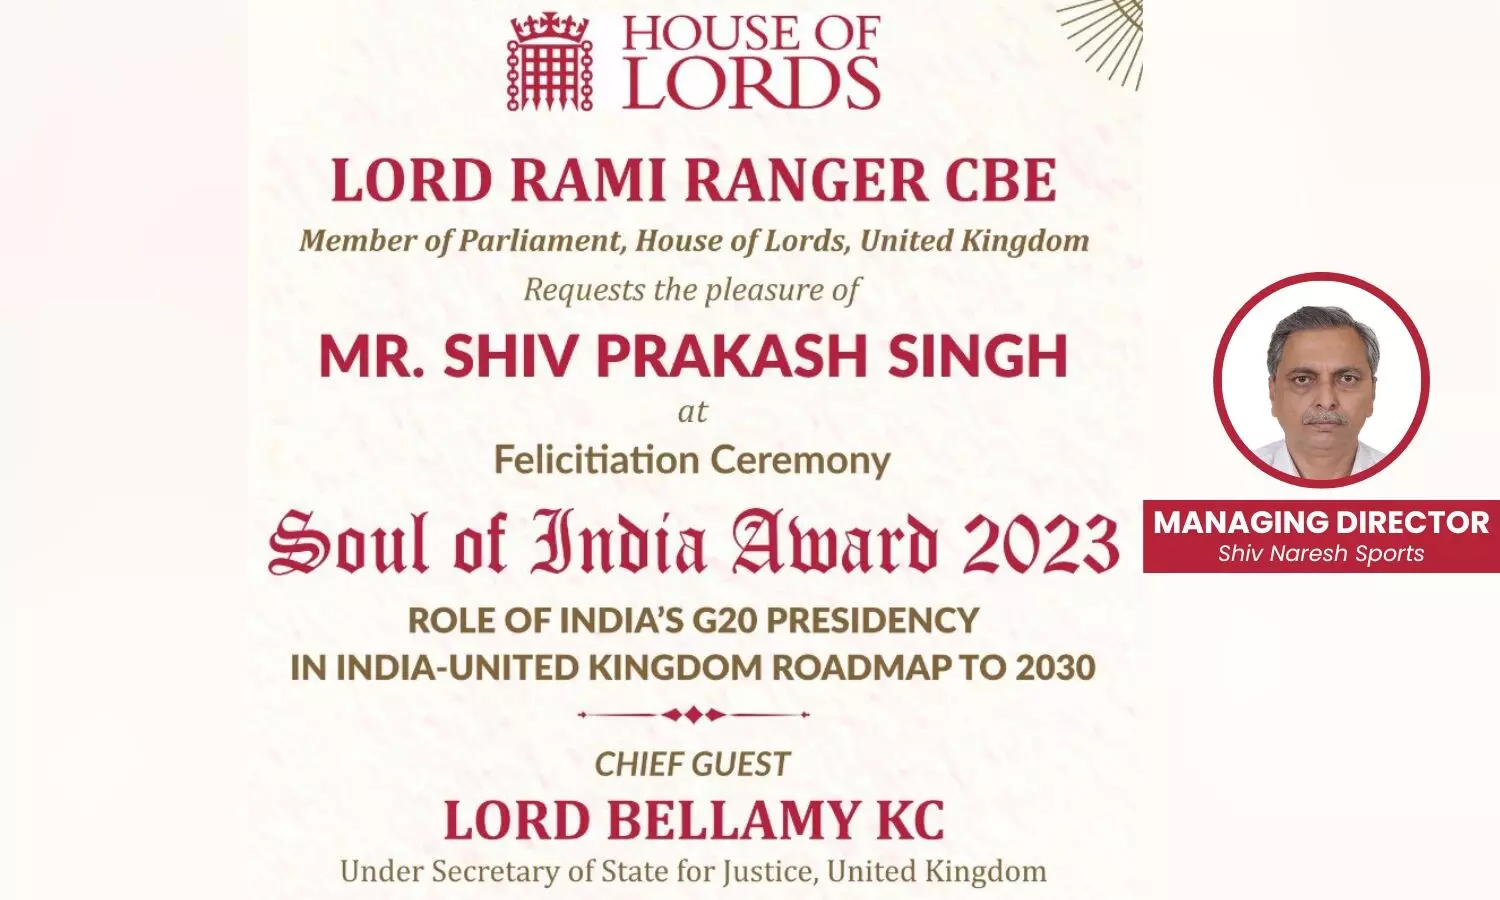 Shiv Prakash Singh honoured with the Soul of India Award 2023 | House of Lords, UK